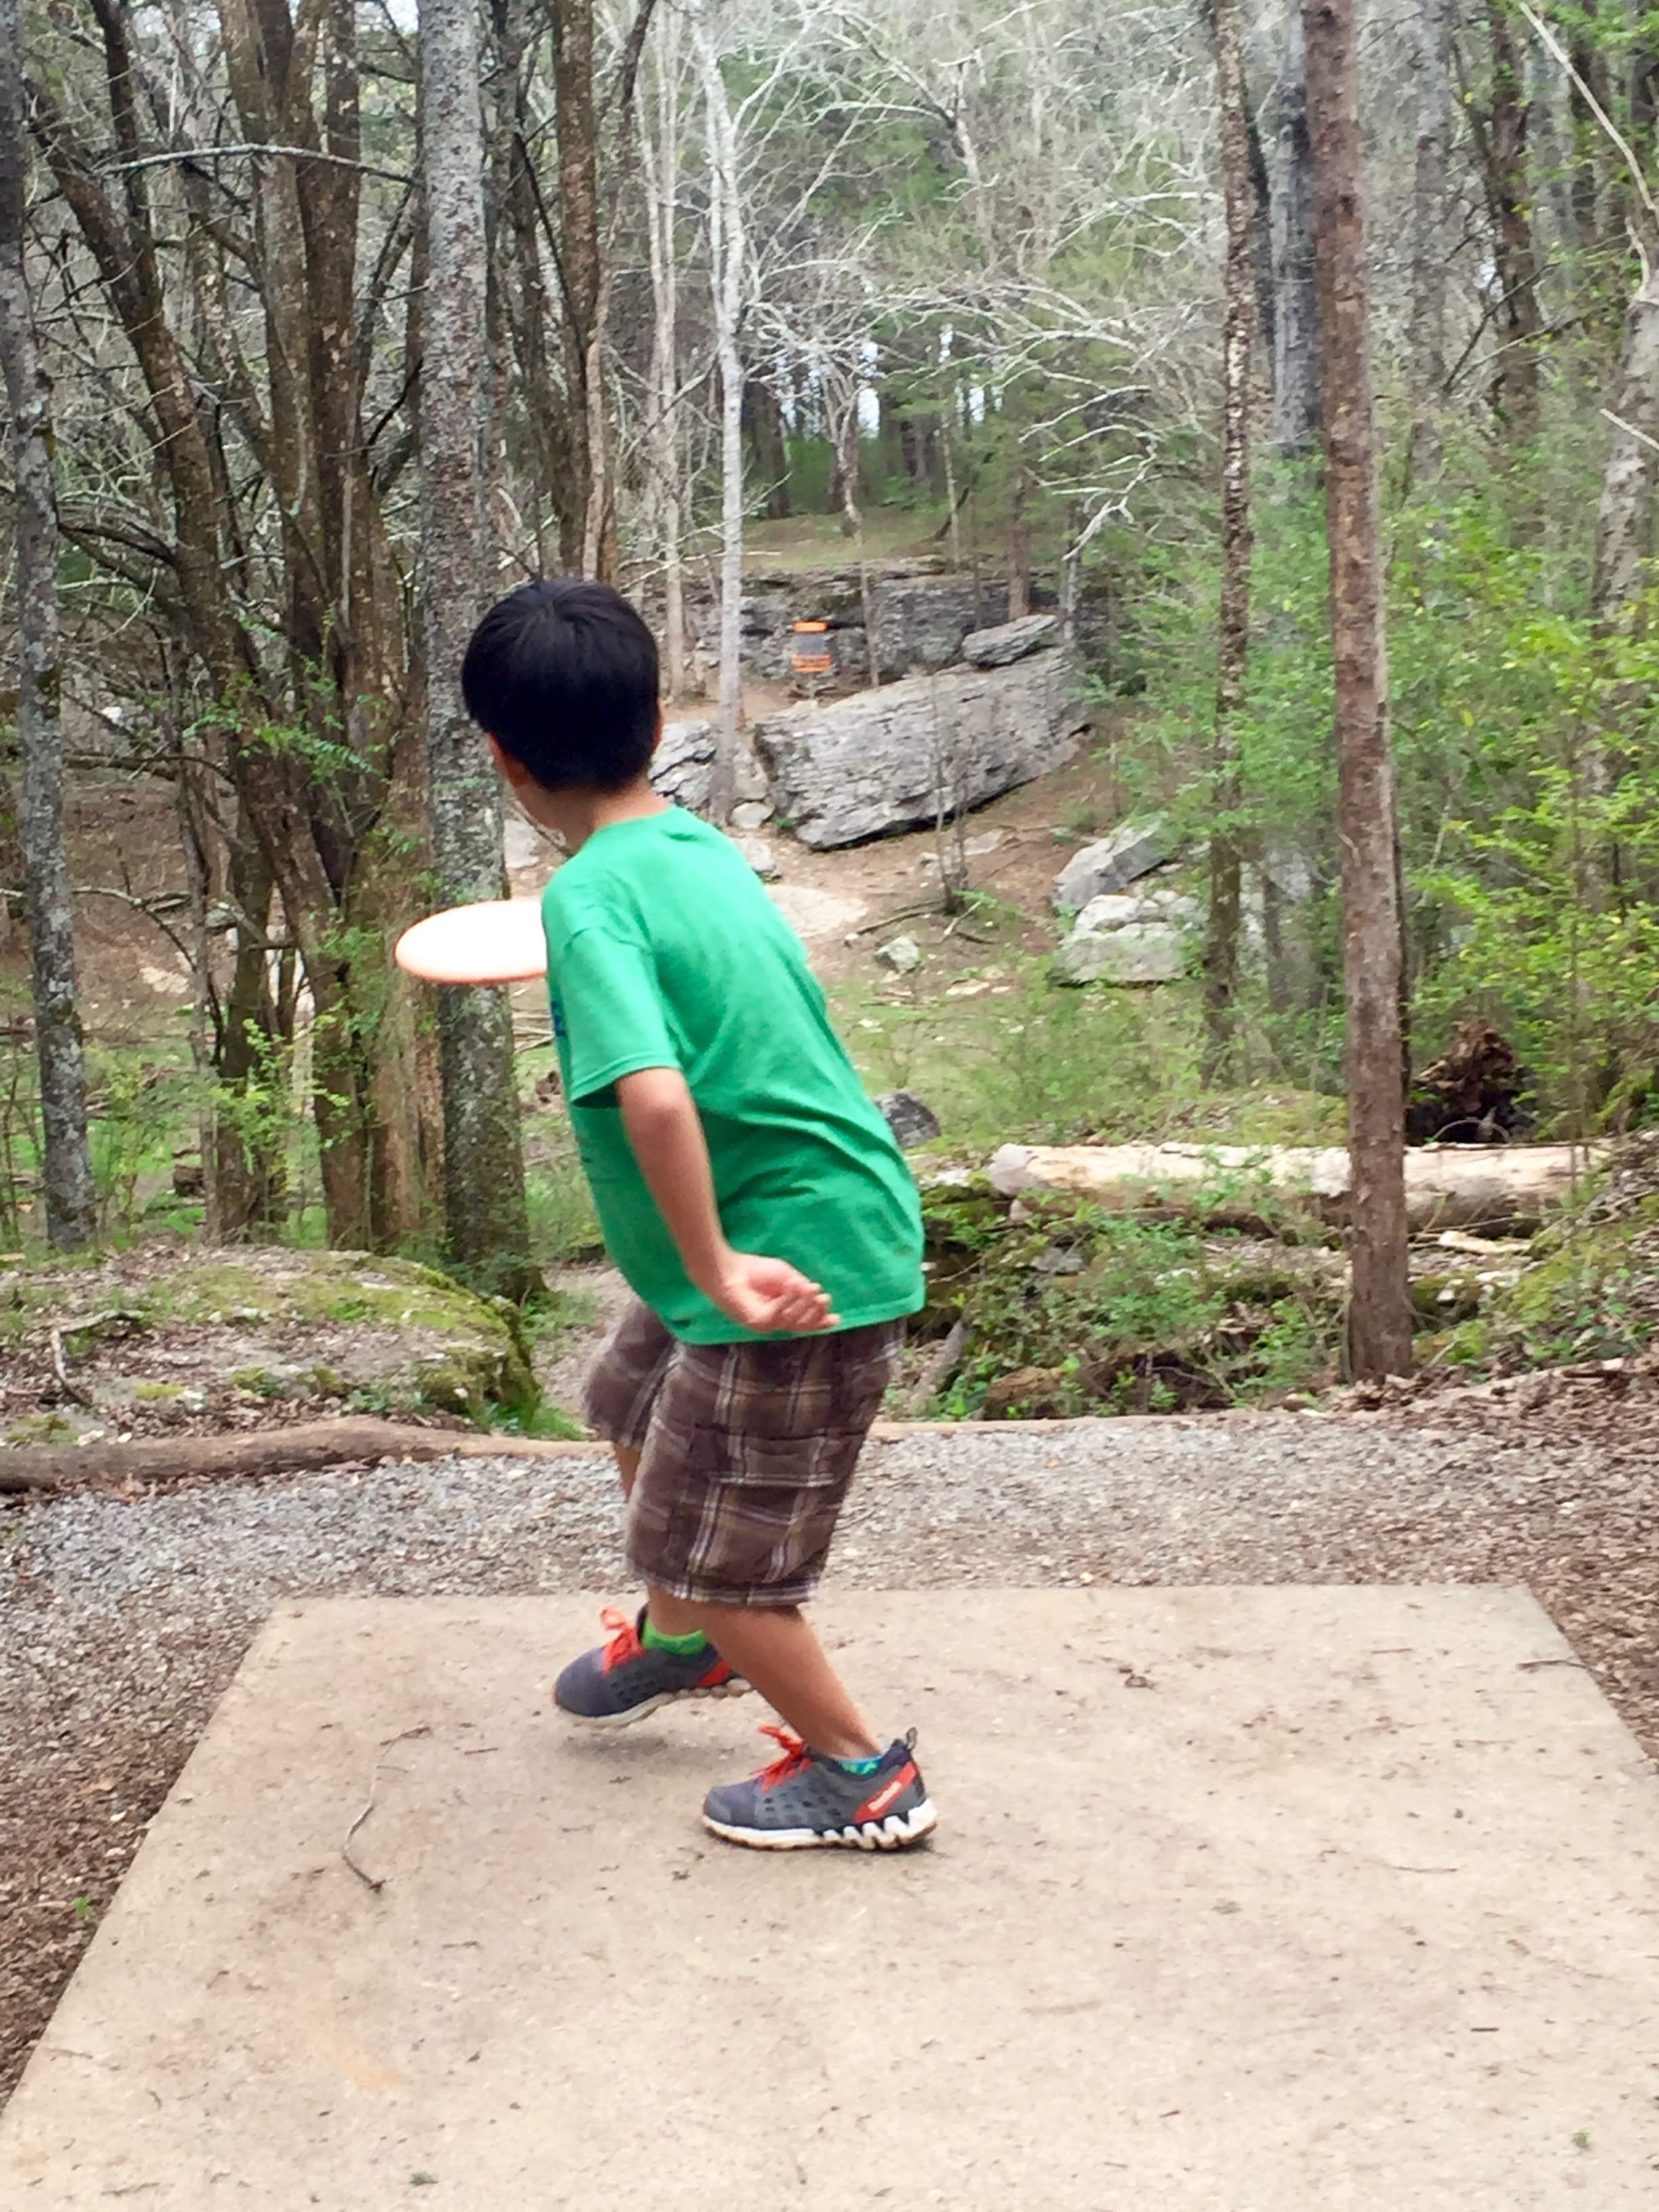 Derrick Playing Disc Golf. Hole 9 at Sharp Spring Disc Golf Course